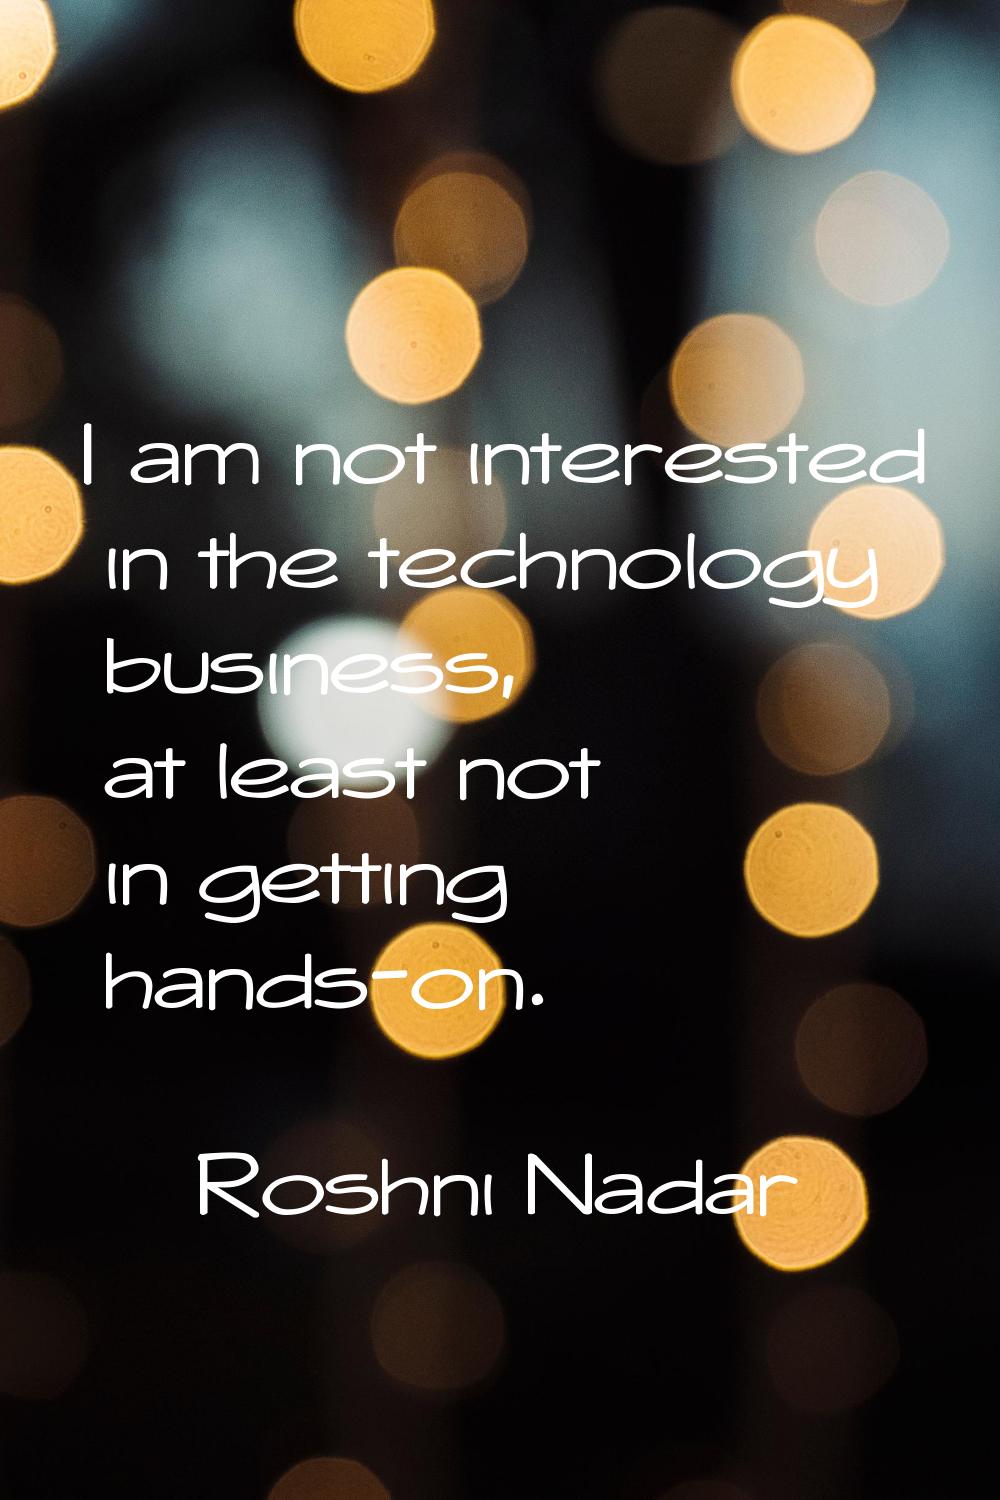 I am not interested in the technology business, at least not in getting hands-on.